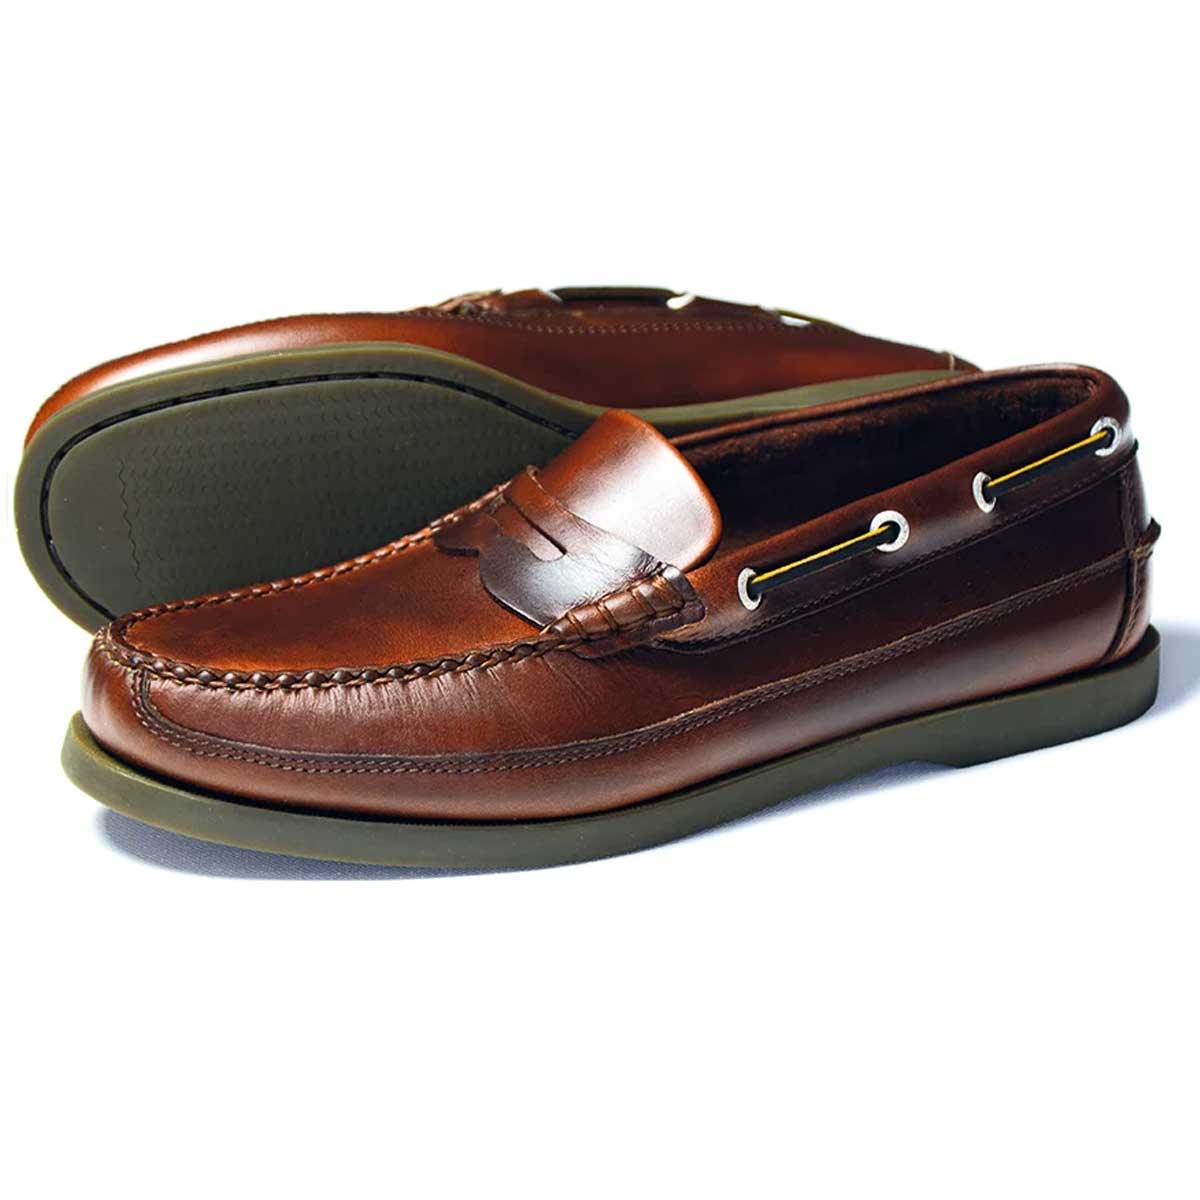 ORCA BAY Mens Fripp Leather Loafers - Elk